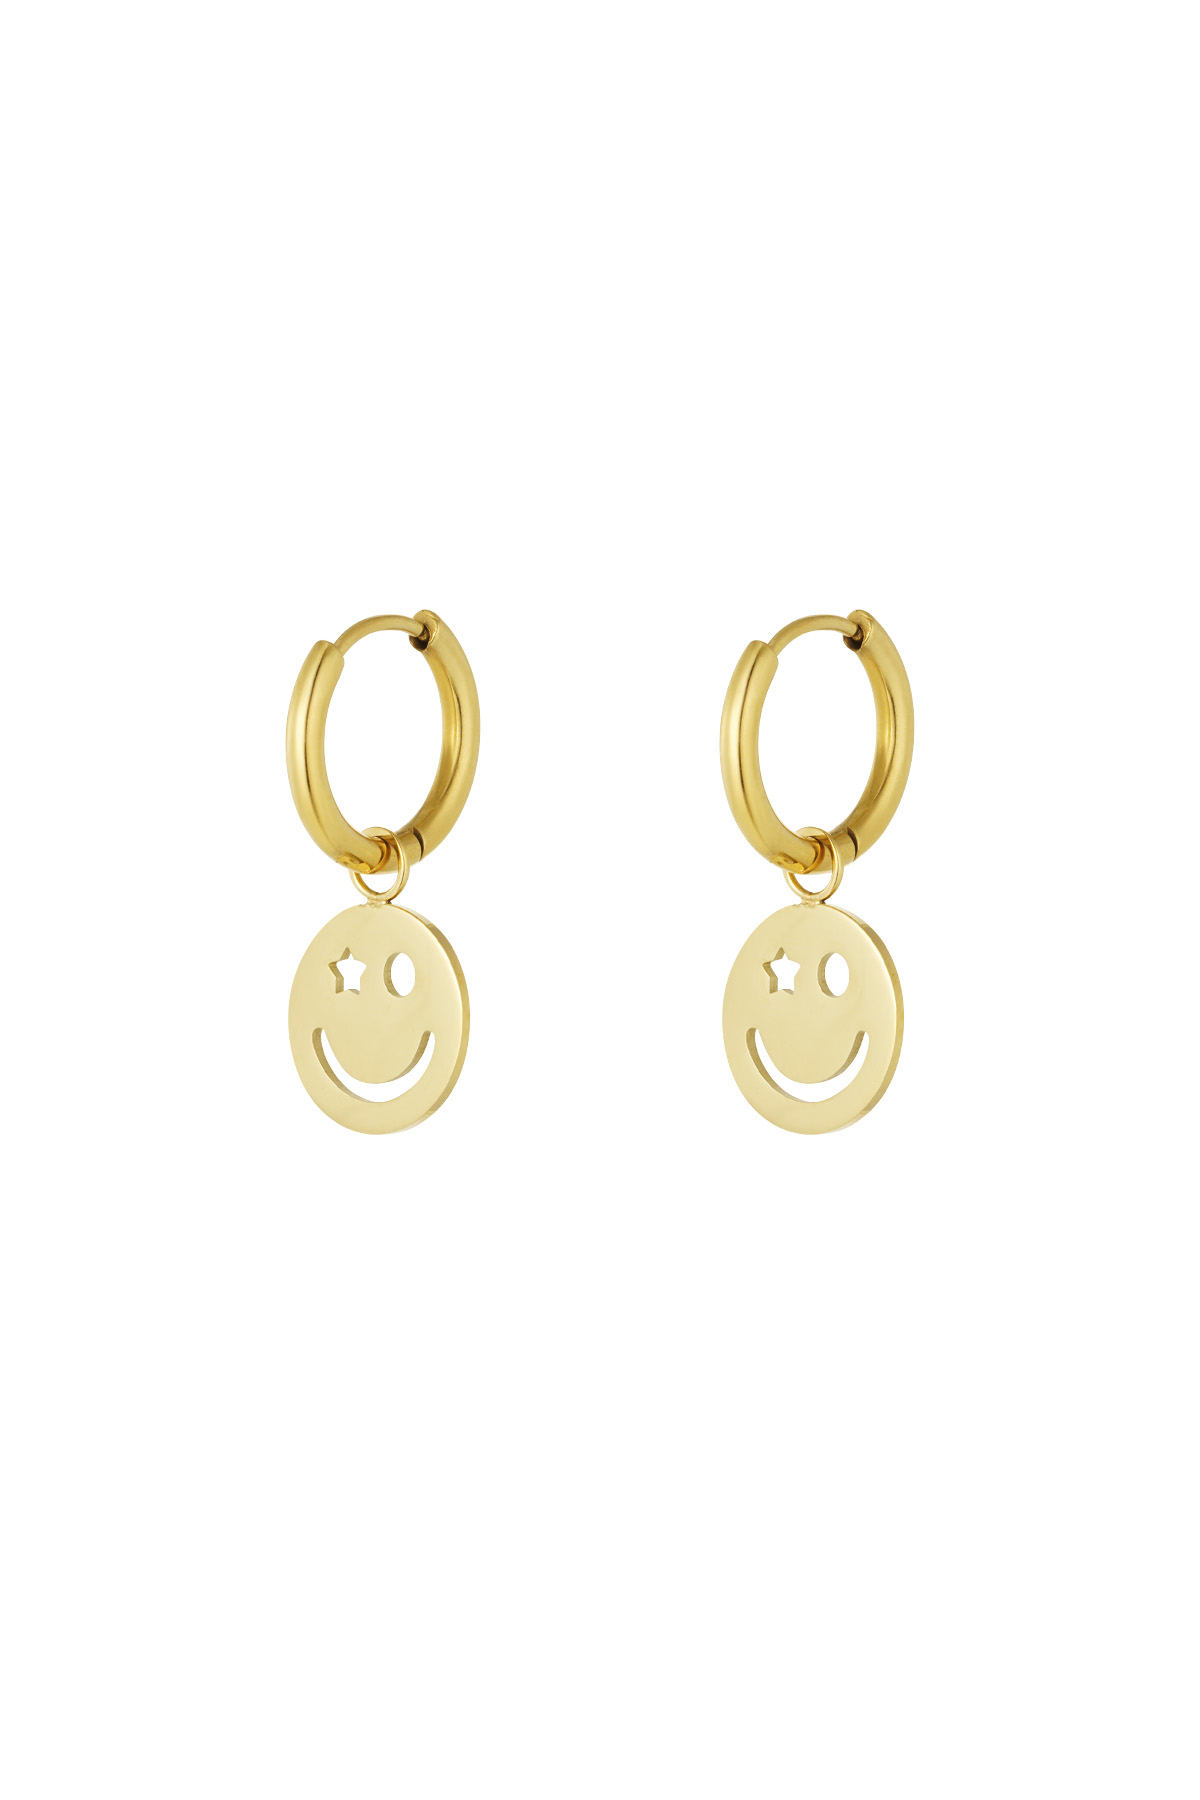 Earrings be happy smiley - gold h5 